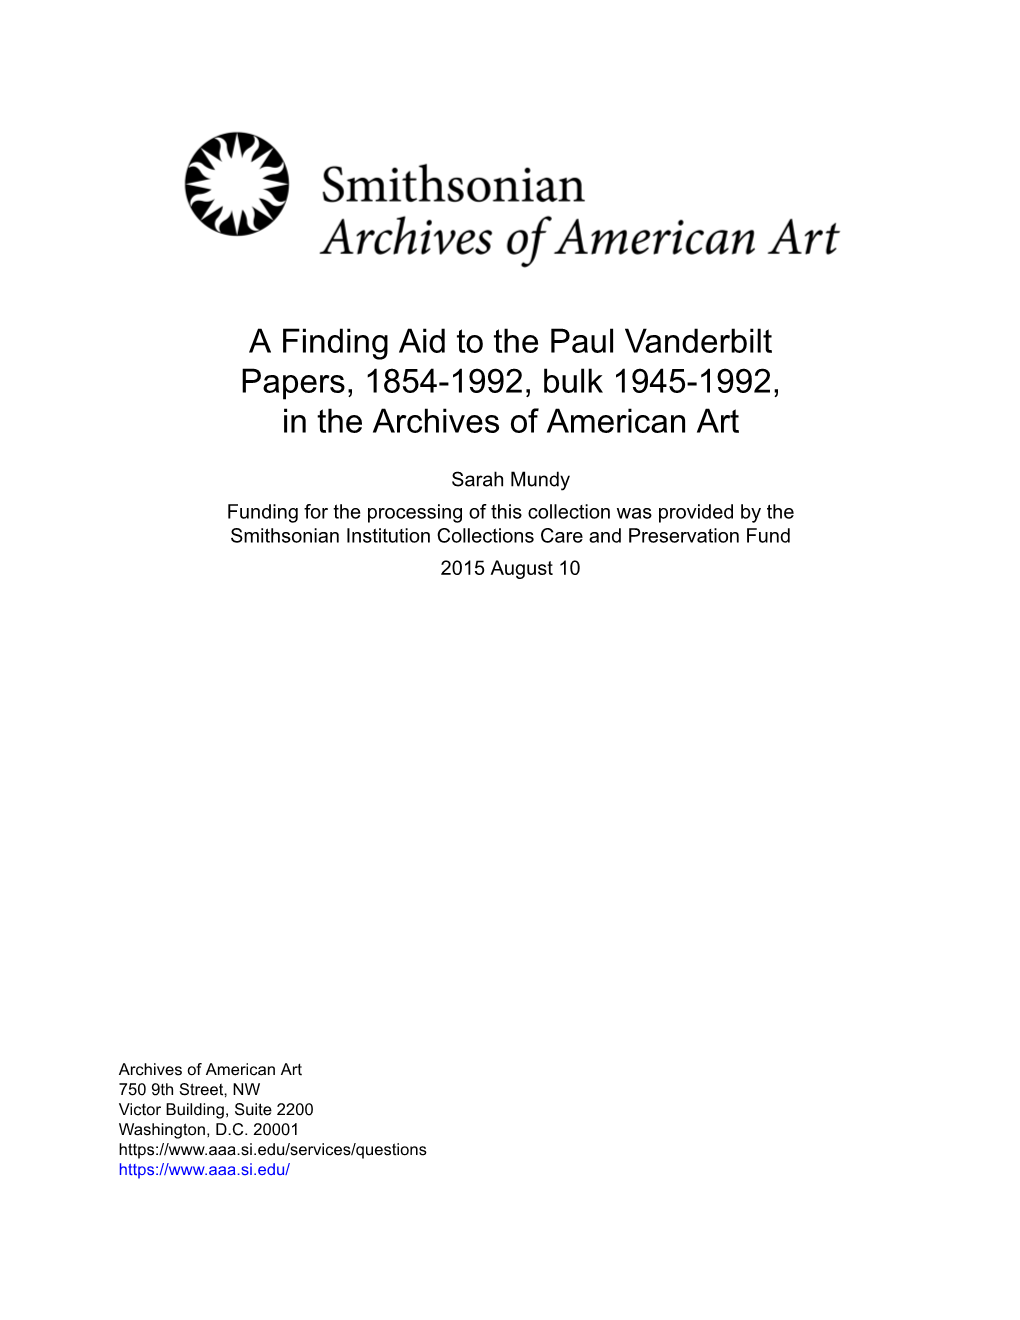 A Finding Aid to the Paul Vanderbilt Papers, 1854-1992, Bulk 1945-1992, in the Archives of American Art